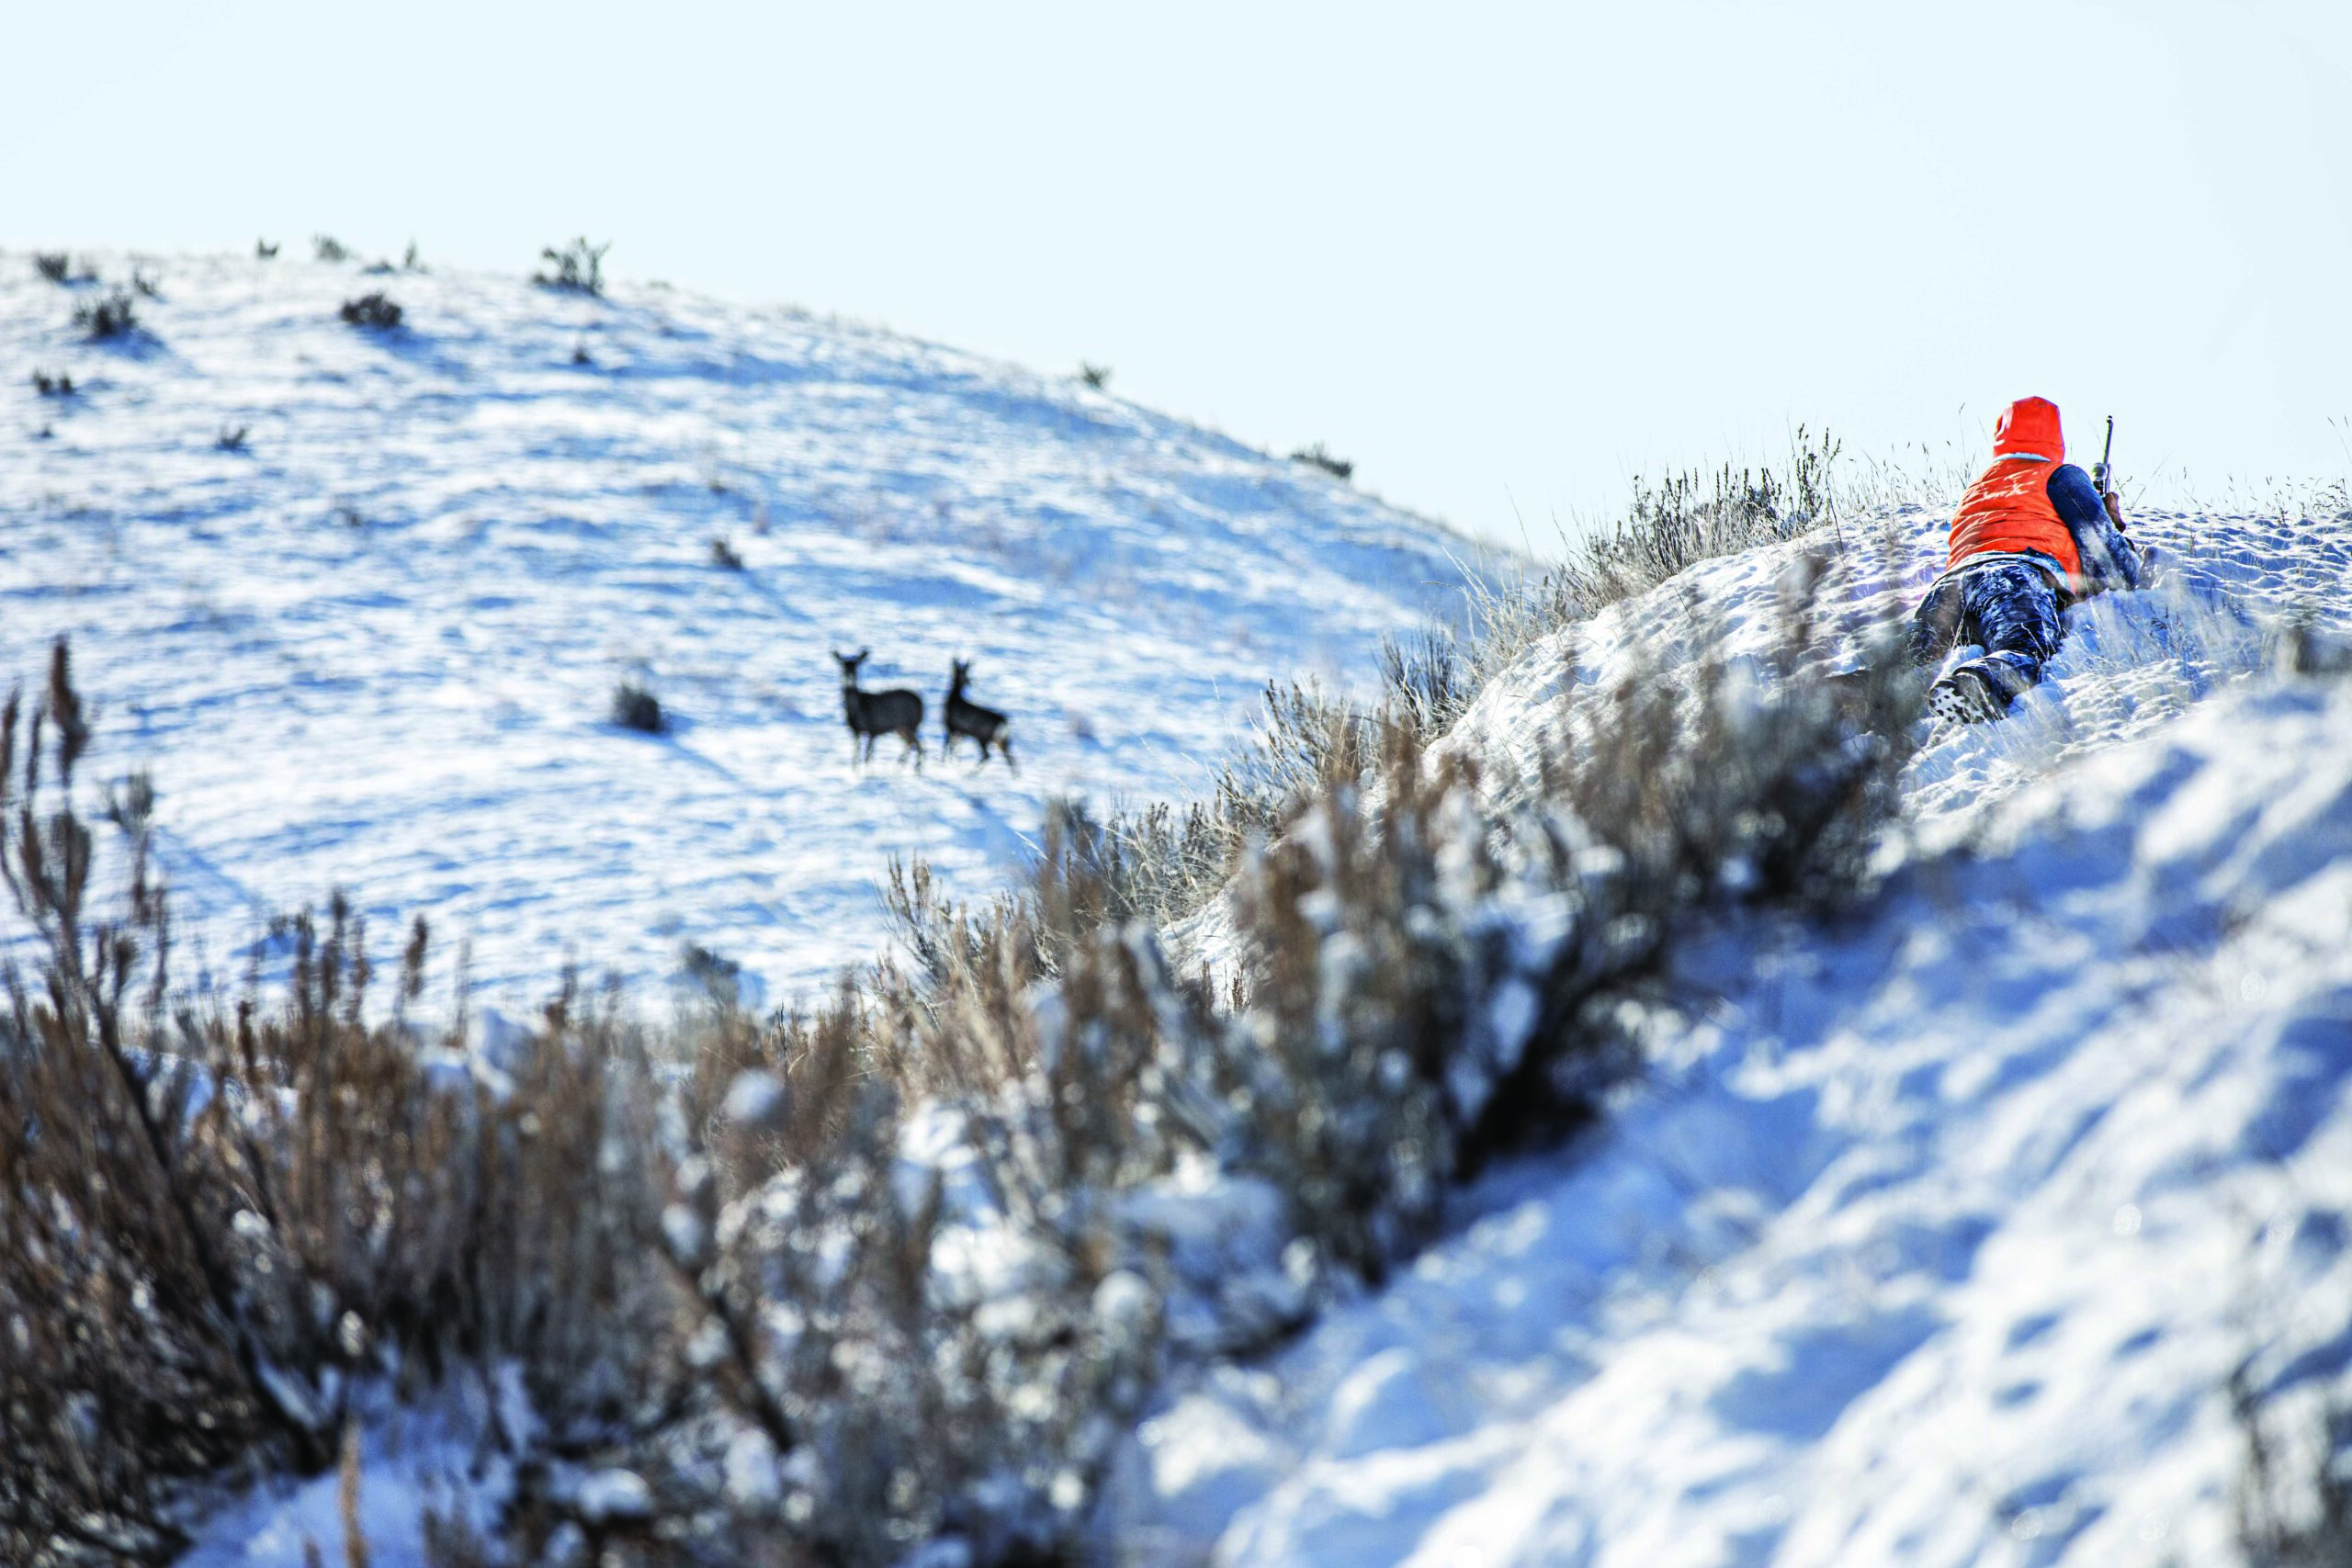 A hunter in blaze orange on a hill, over looking a snowy hill.